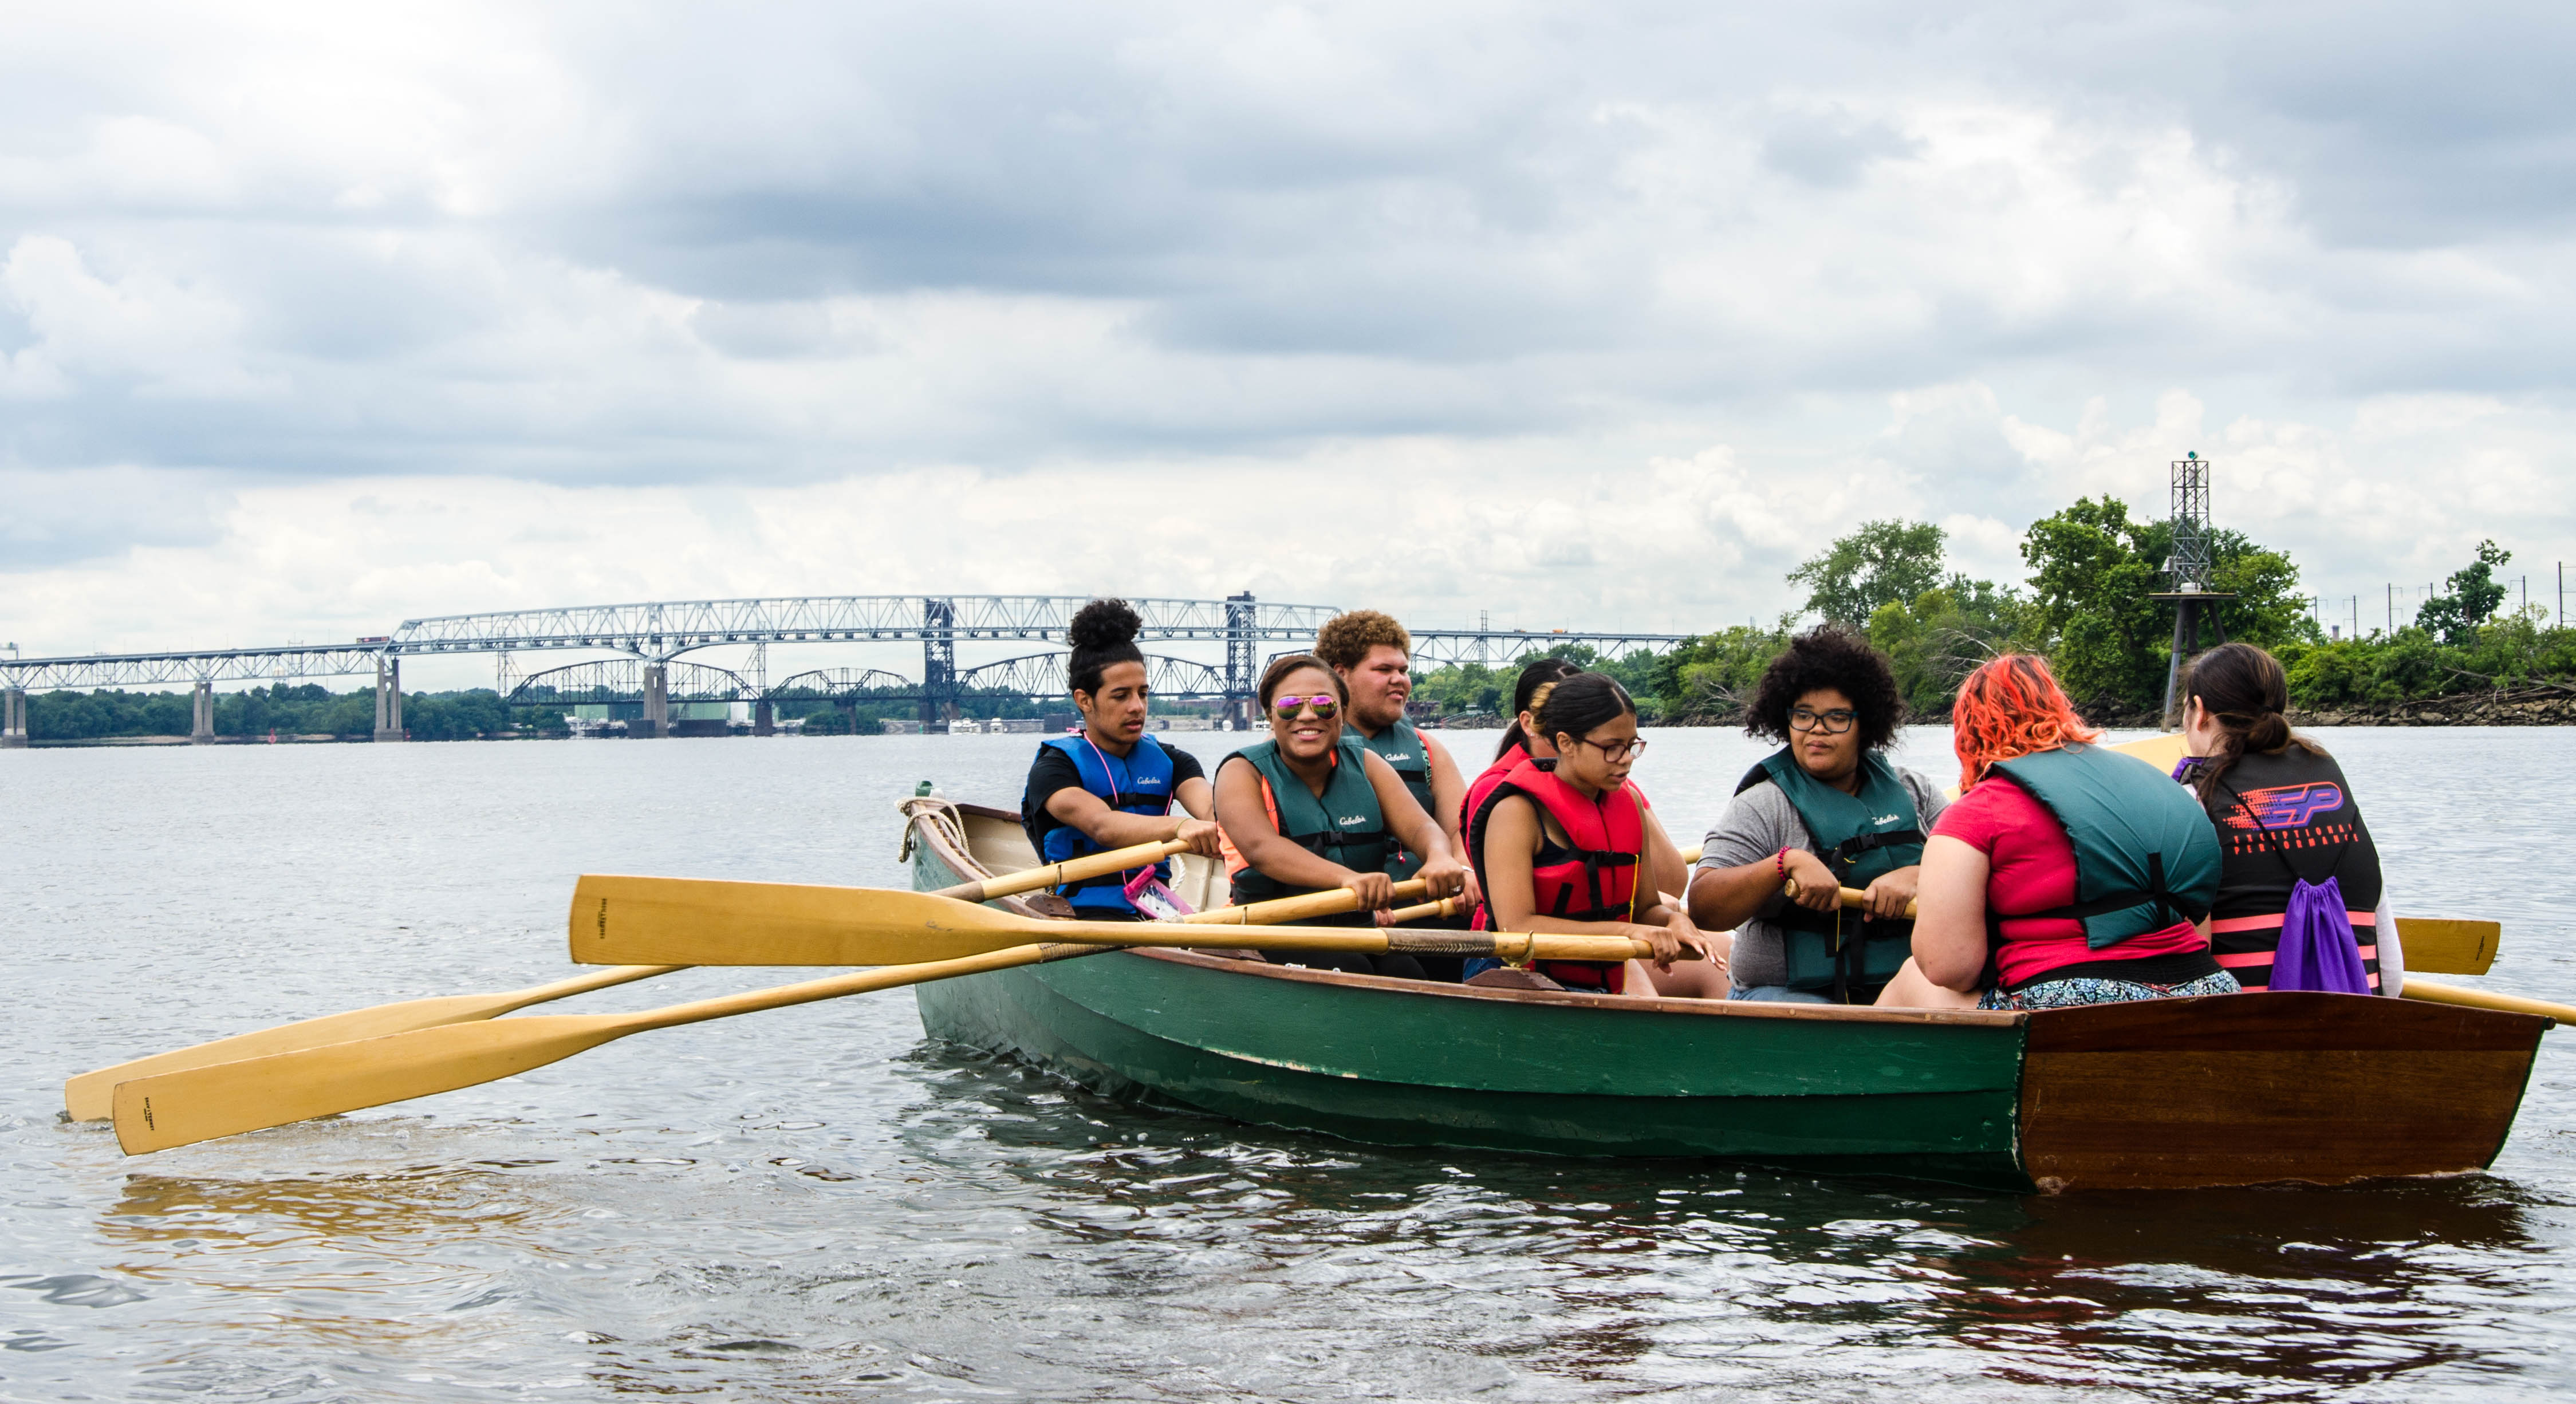 Photo: Youth in a canoe rowing together on a river.